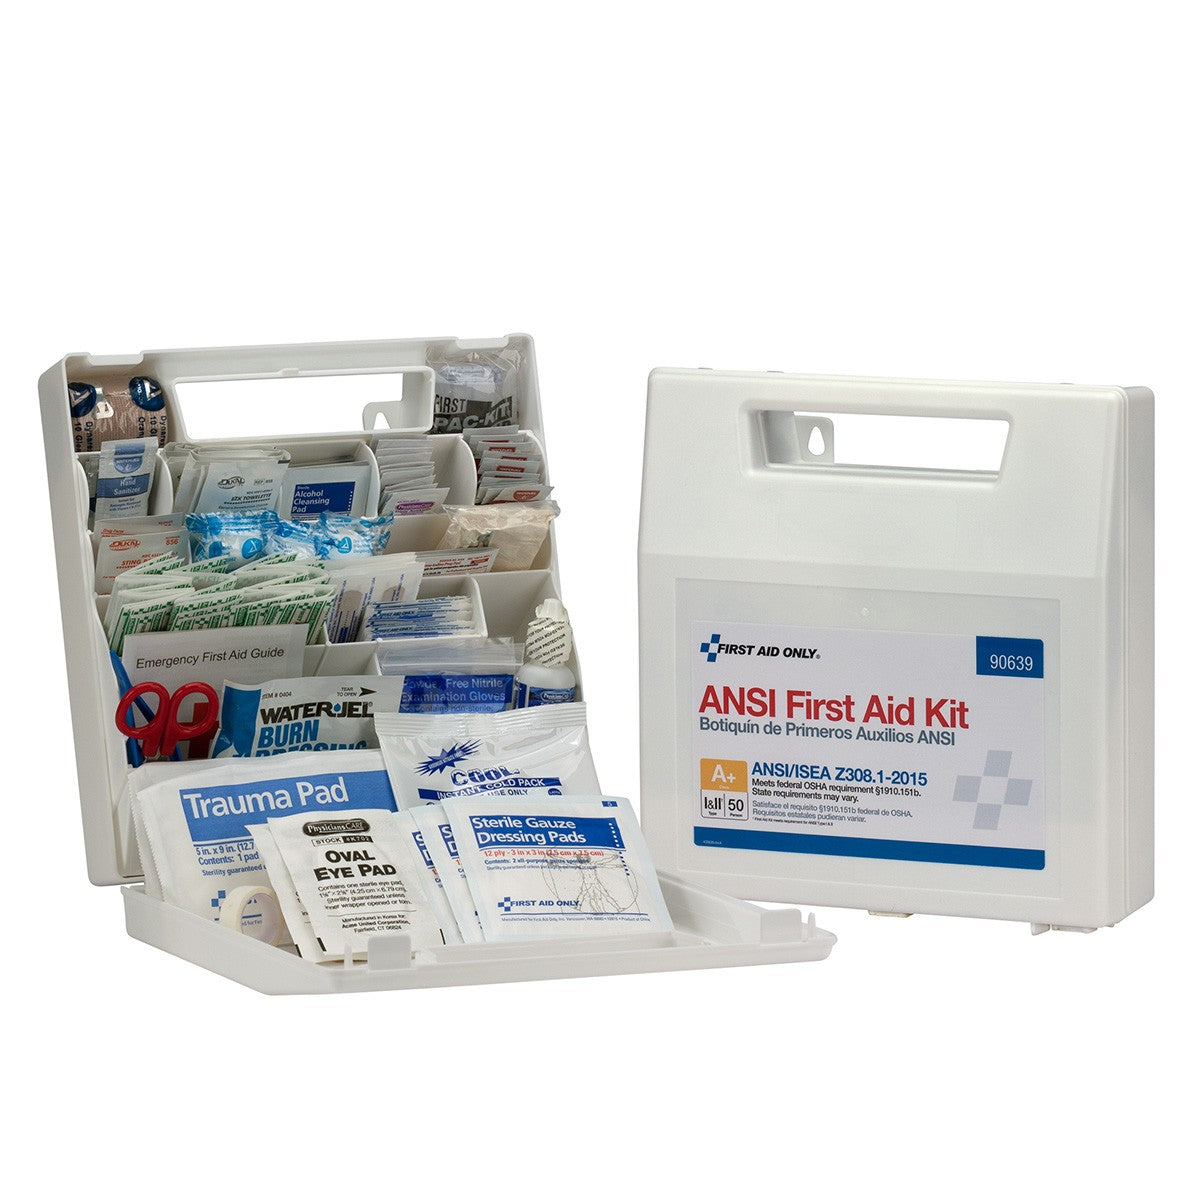 50 Person Bulk Plastic First Aid Kit With Dividers, ANSI A+, Type I &amp; II - BS-FAK-90639-1-FM